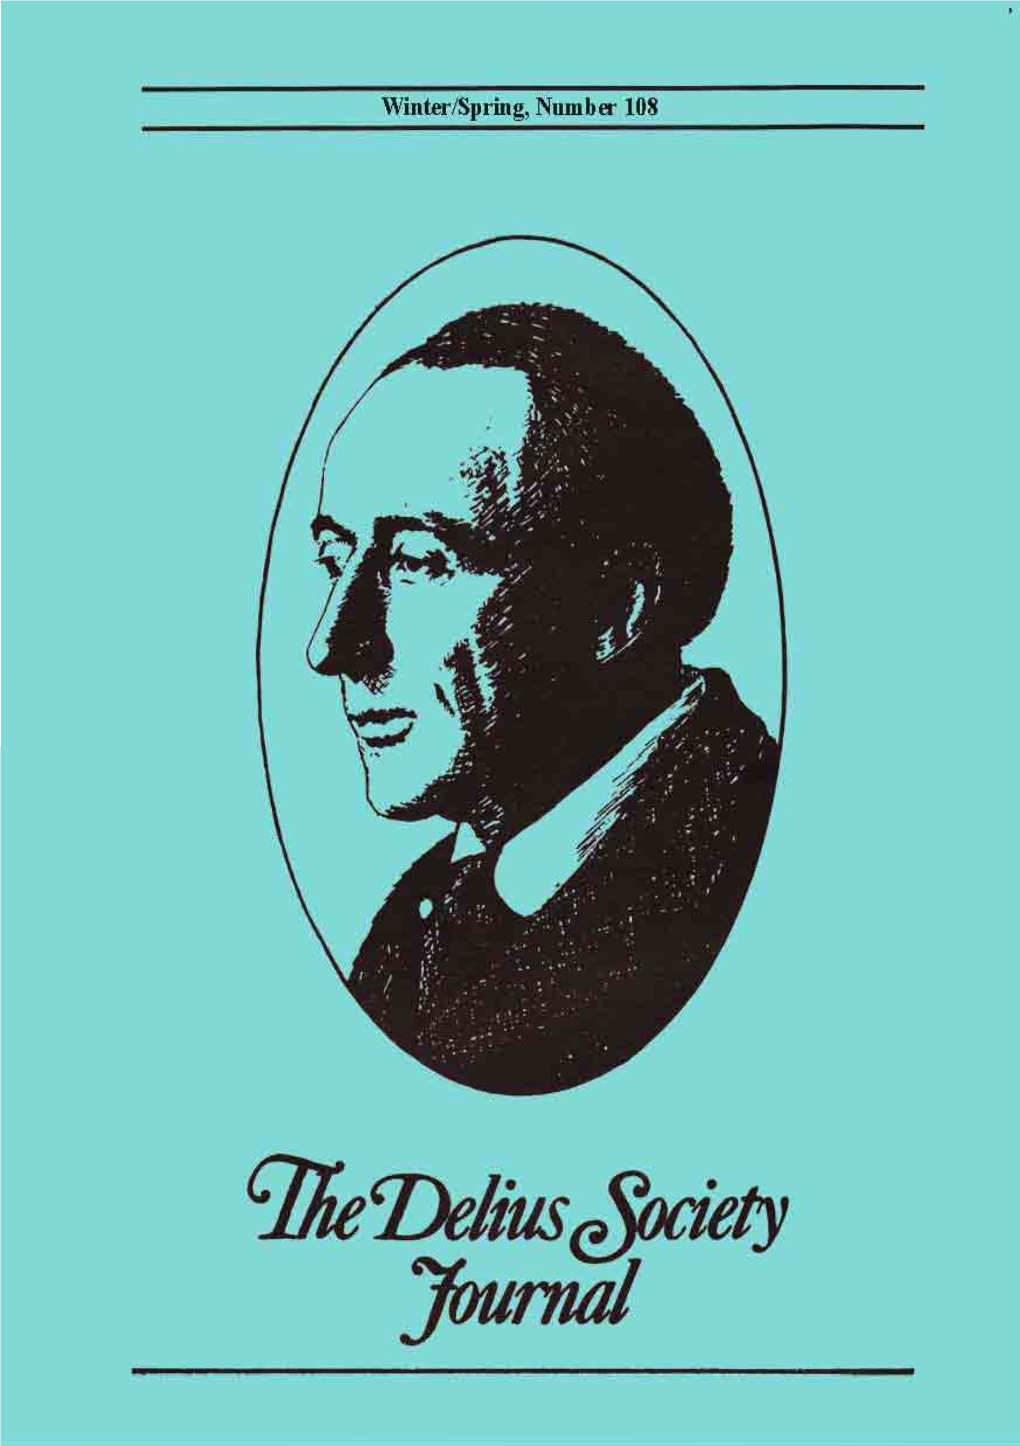 The Delius Society Journal Winter/Spring 1992, Number 108